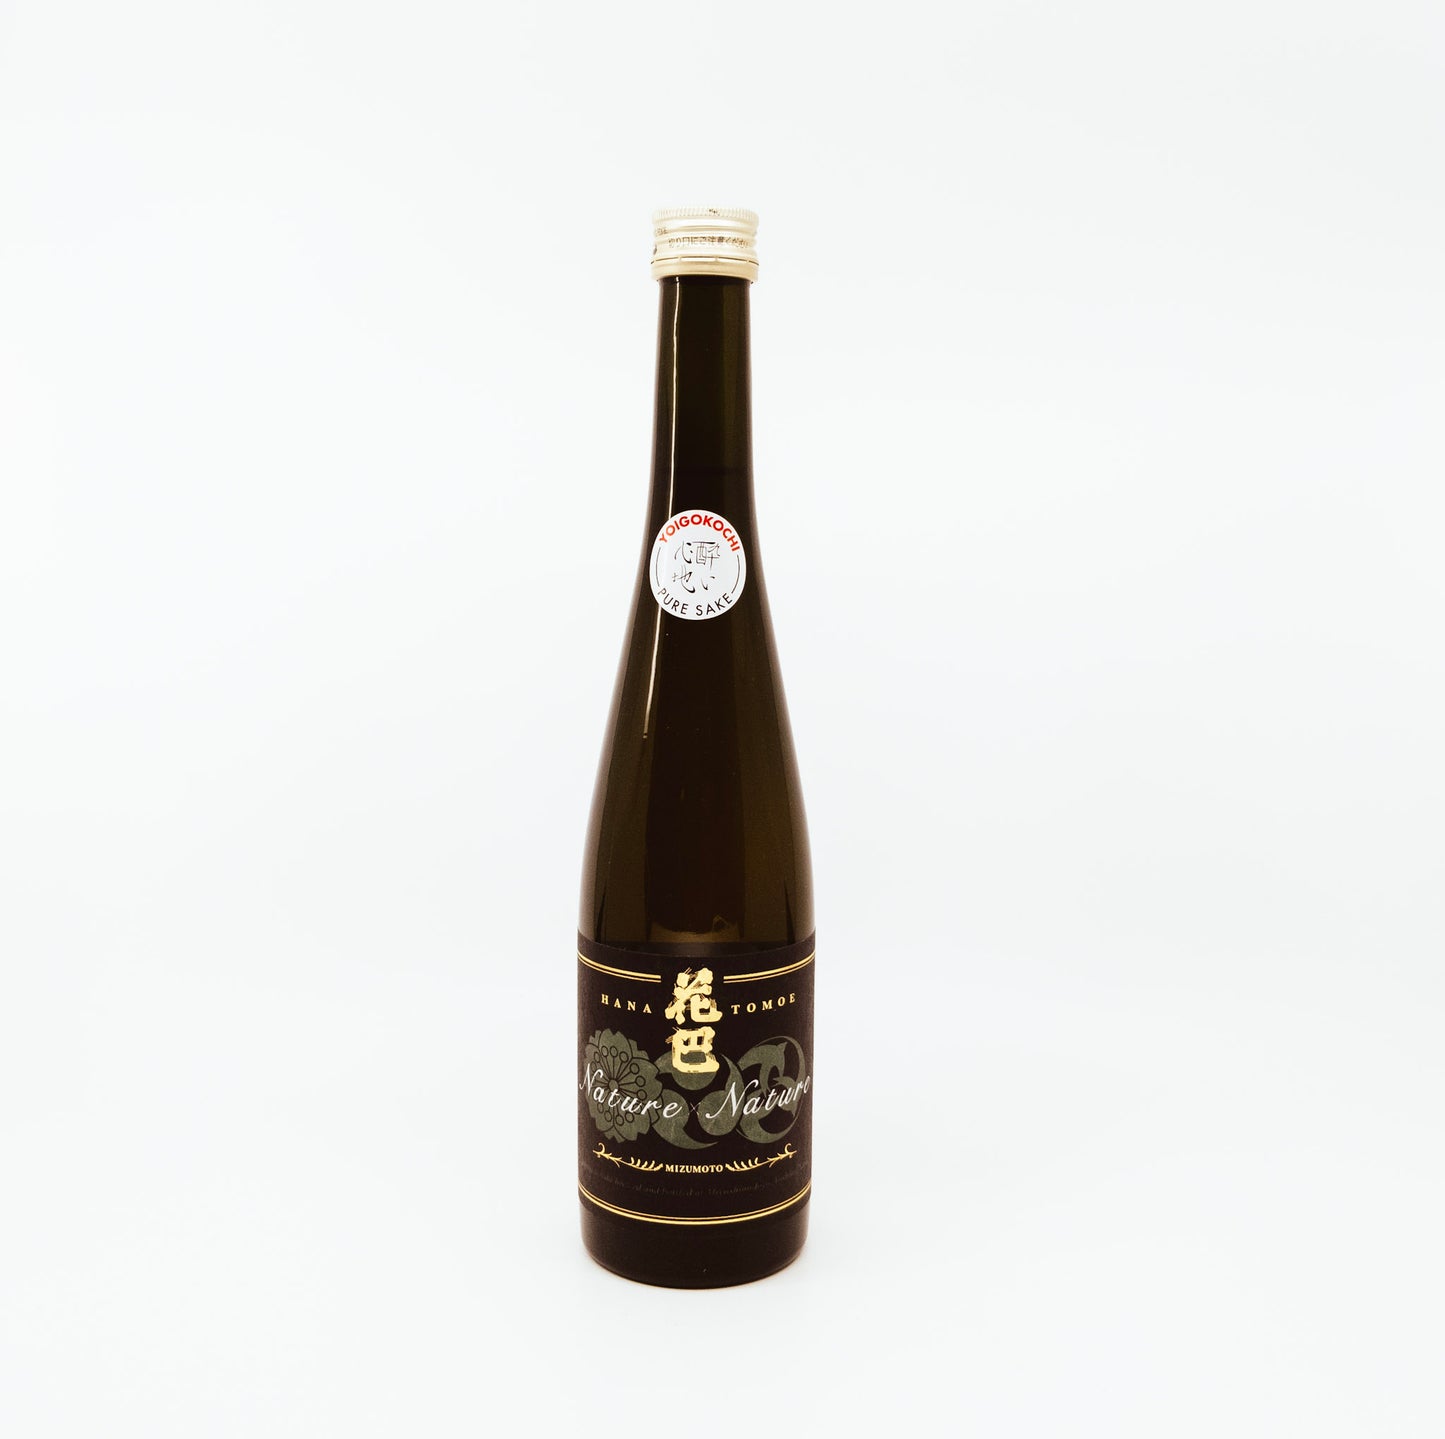 skinny black bottle with gold writing on label